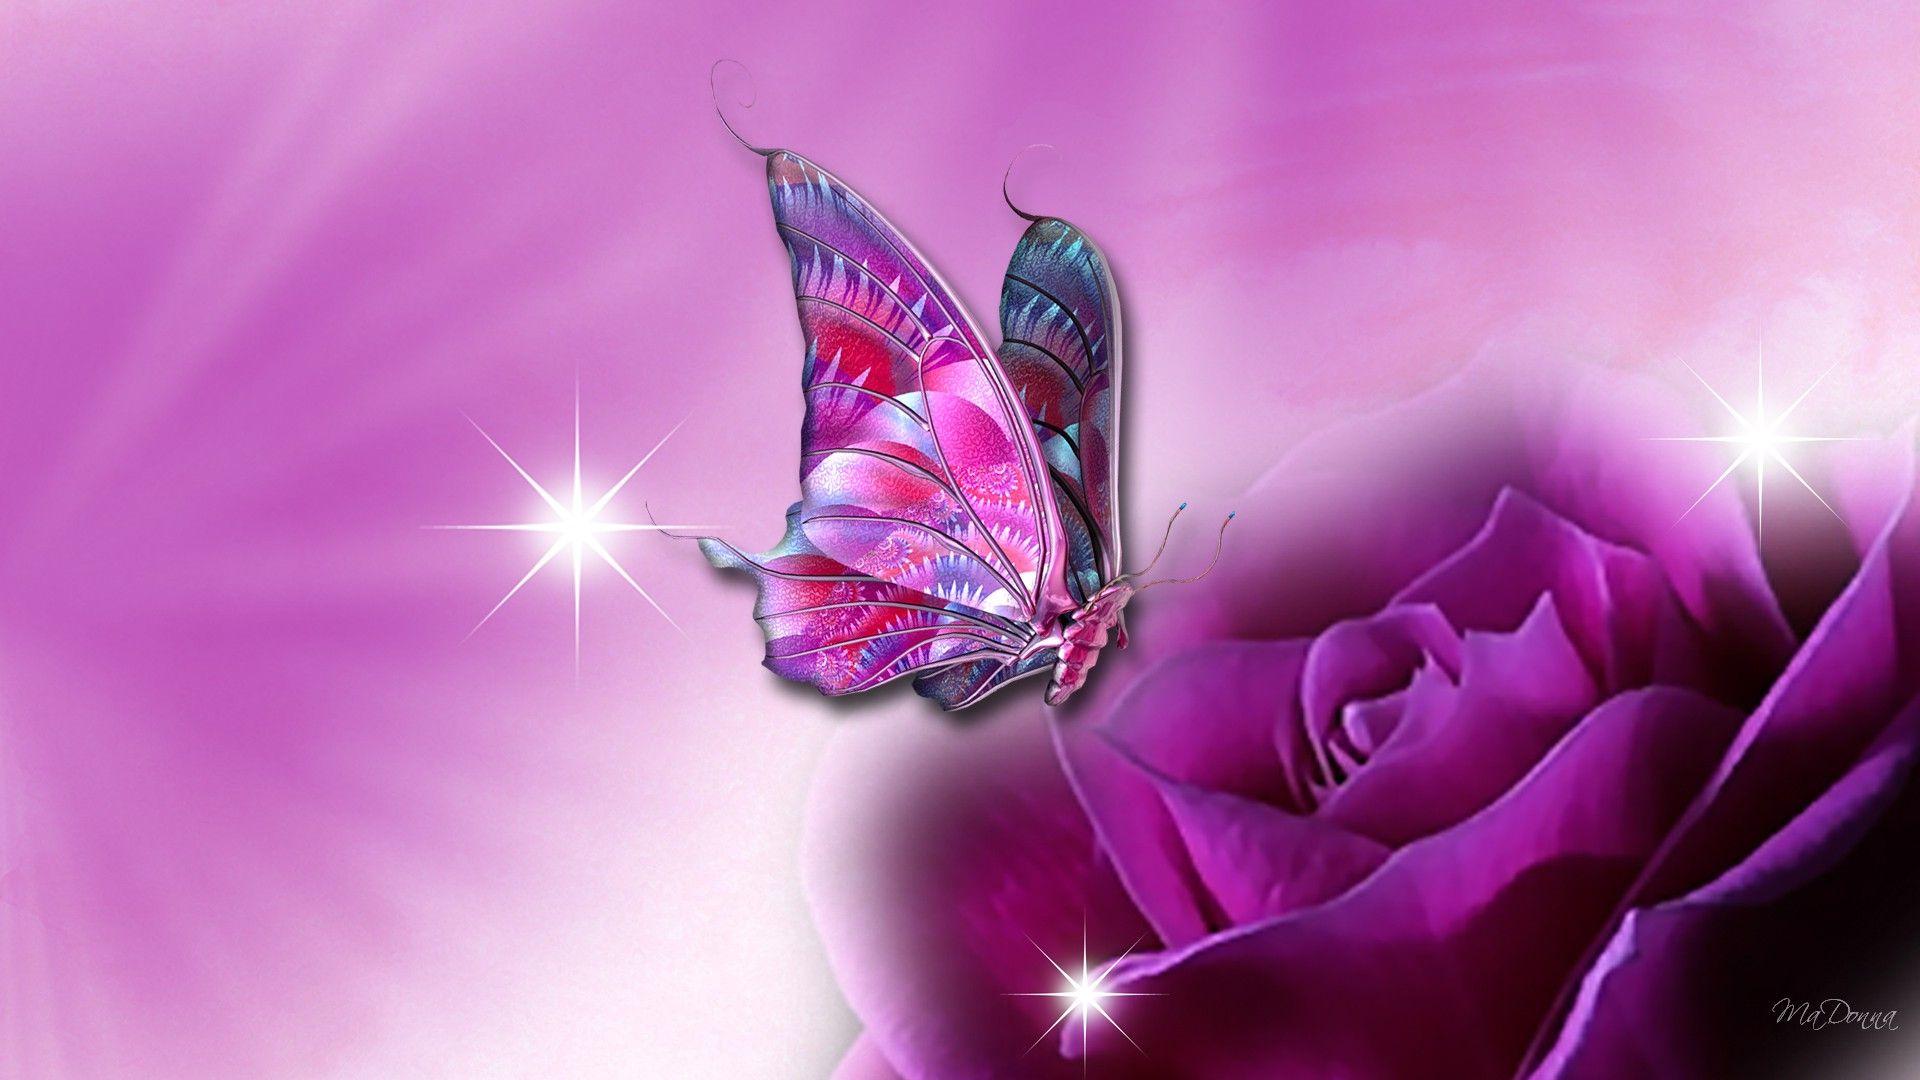 Wallpaper.wiki Download Awesome Butterfly For Laptop Background